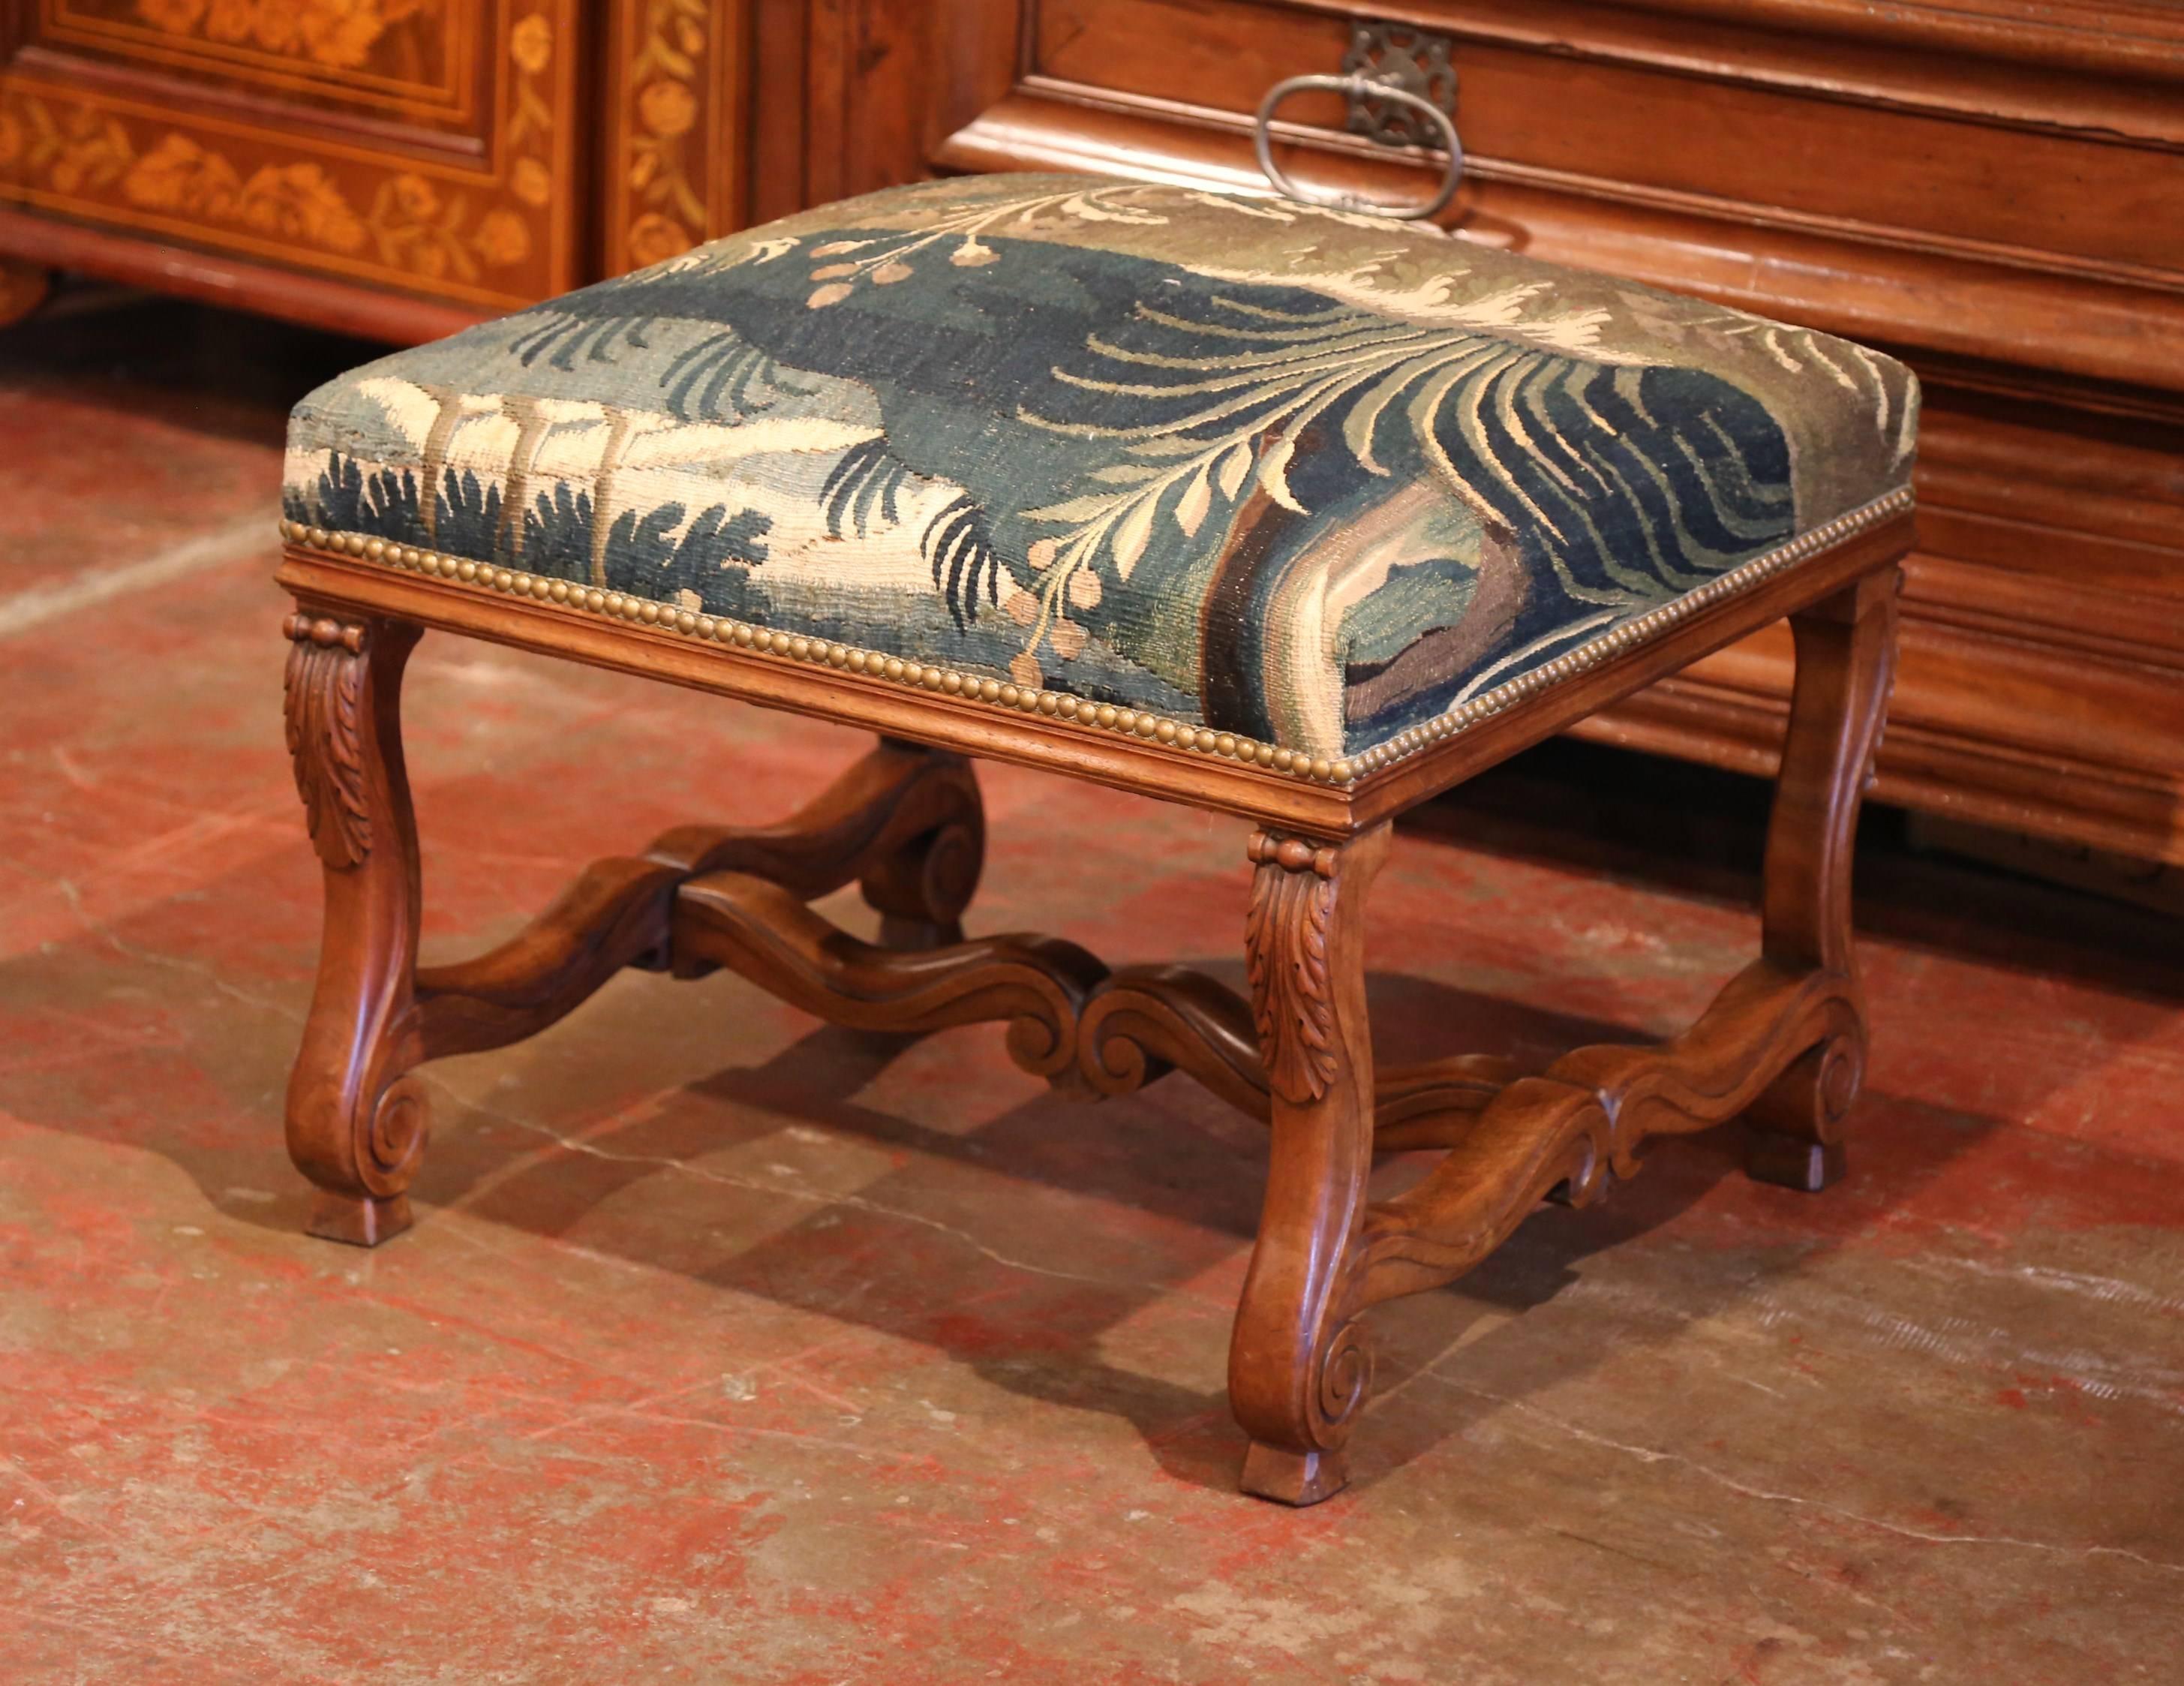 This elegant antique fruitwood stool was crafted in Southern France, circa 1880. The square seat features four scrolled legs with hand carved acanthus leaves and an elaborate stretcher. The seat has been reupholstered with a colorful, 18th Century